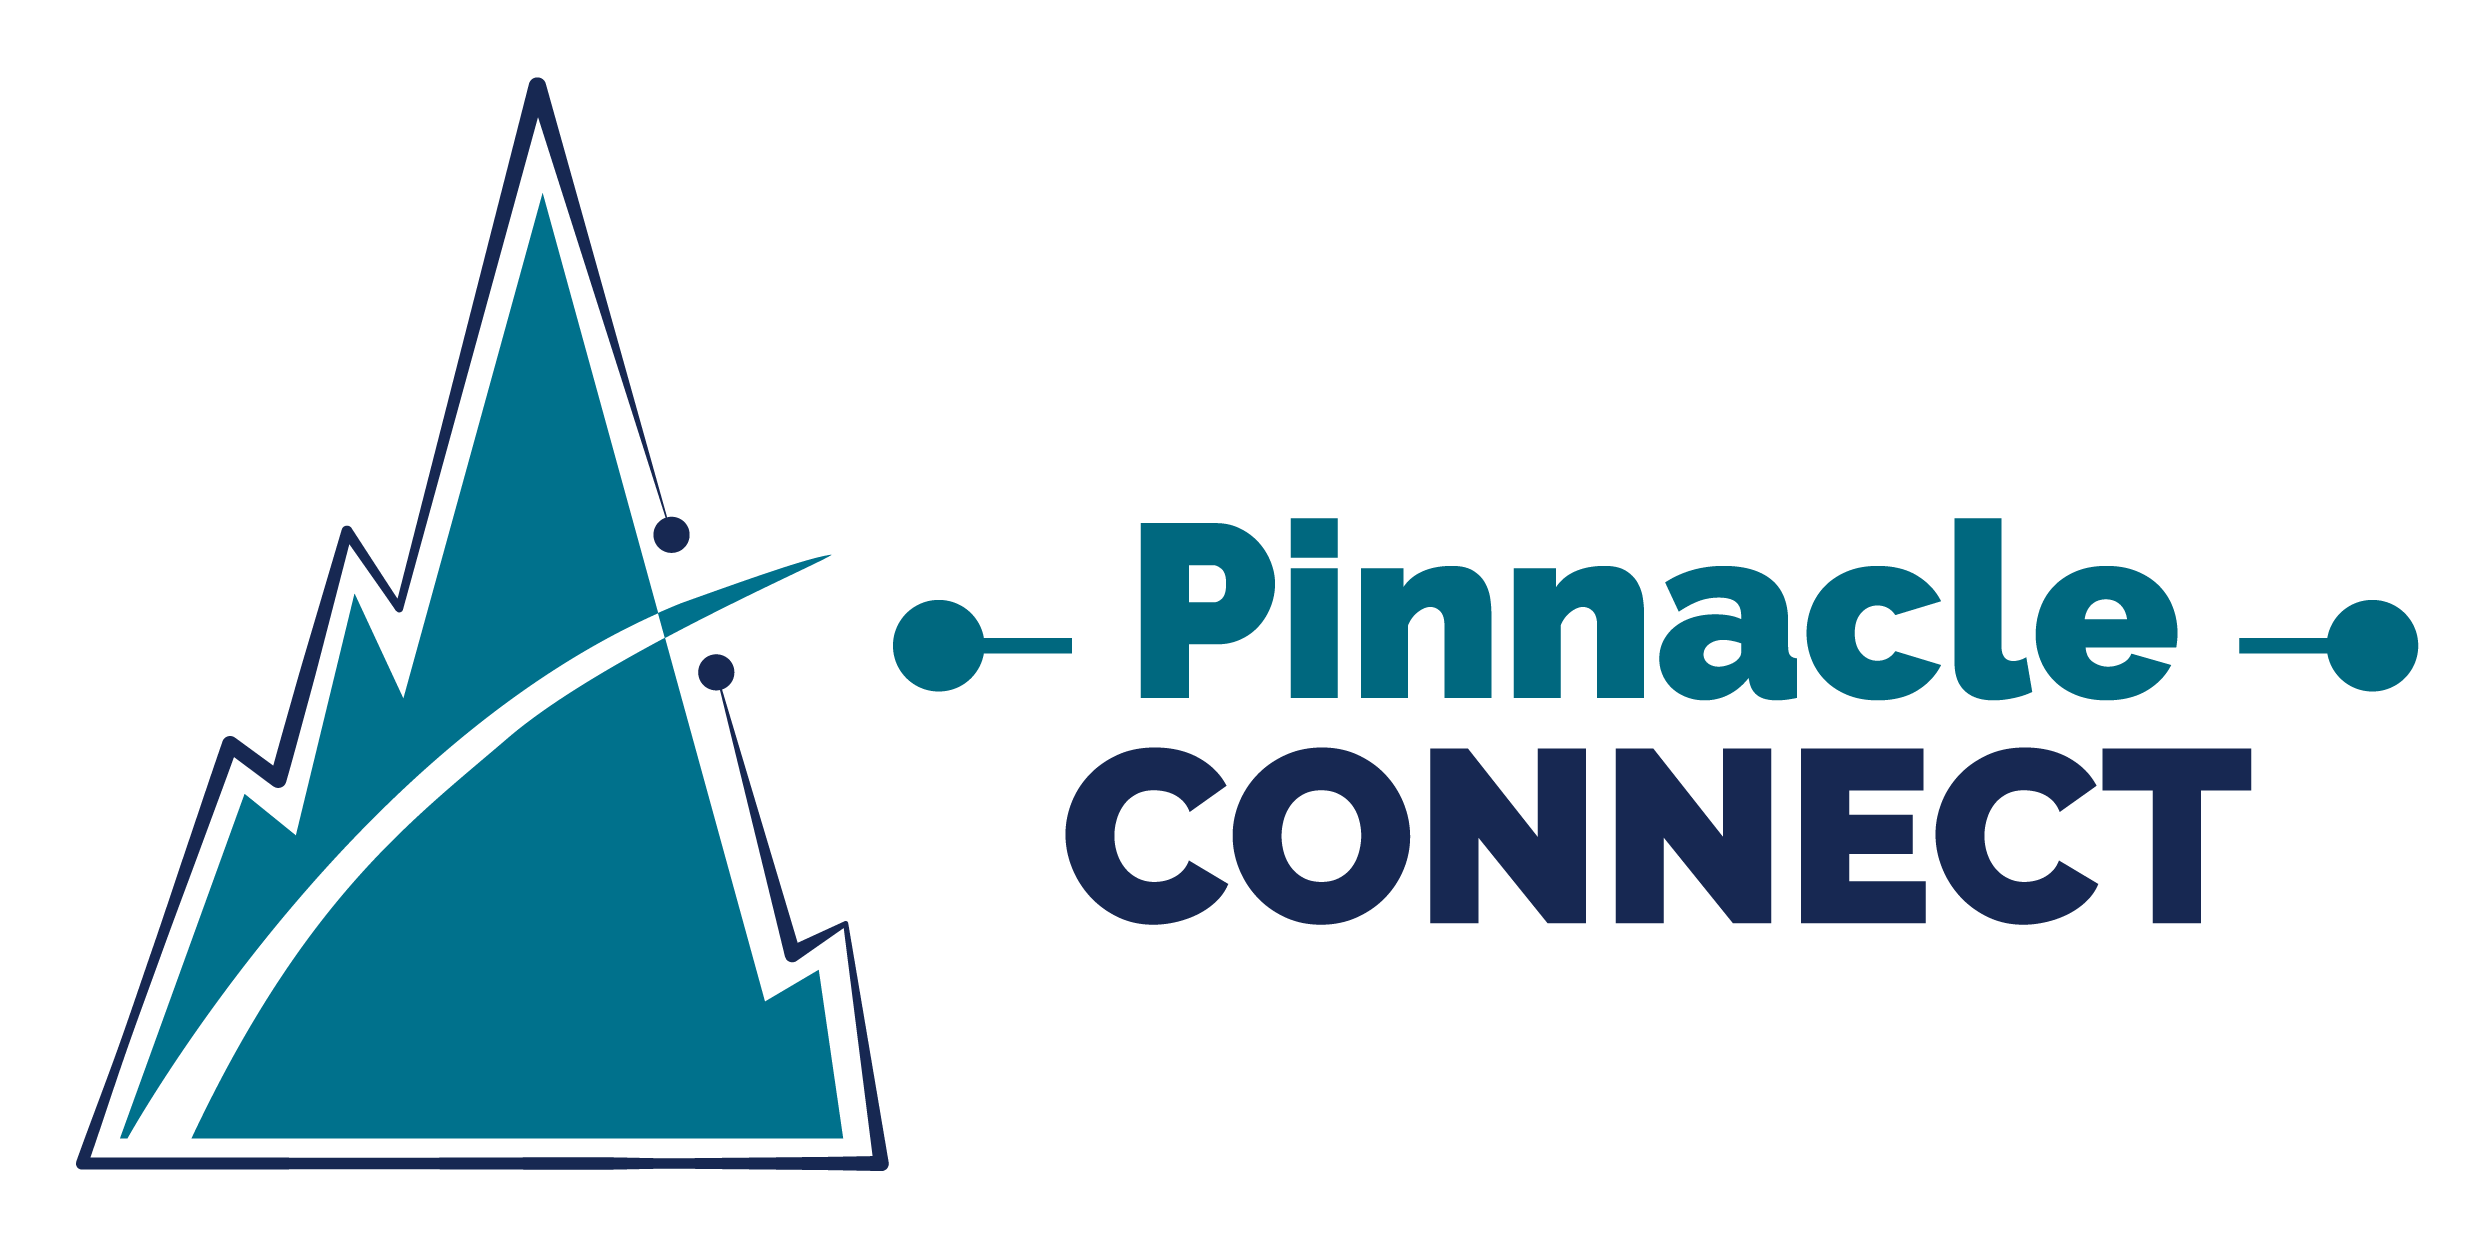 Pinnacle Connect Logo in blue green font